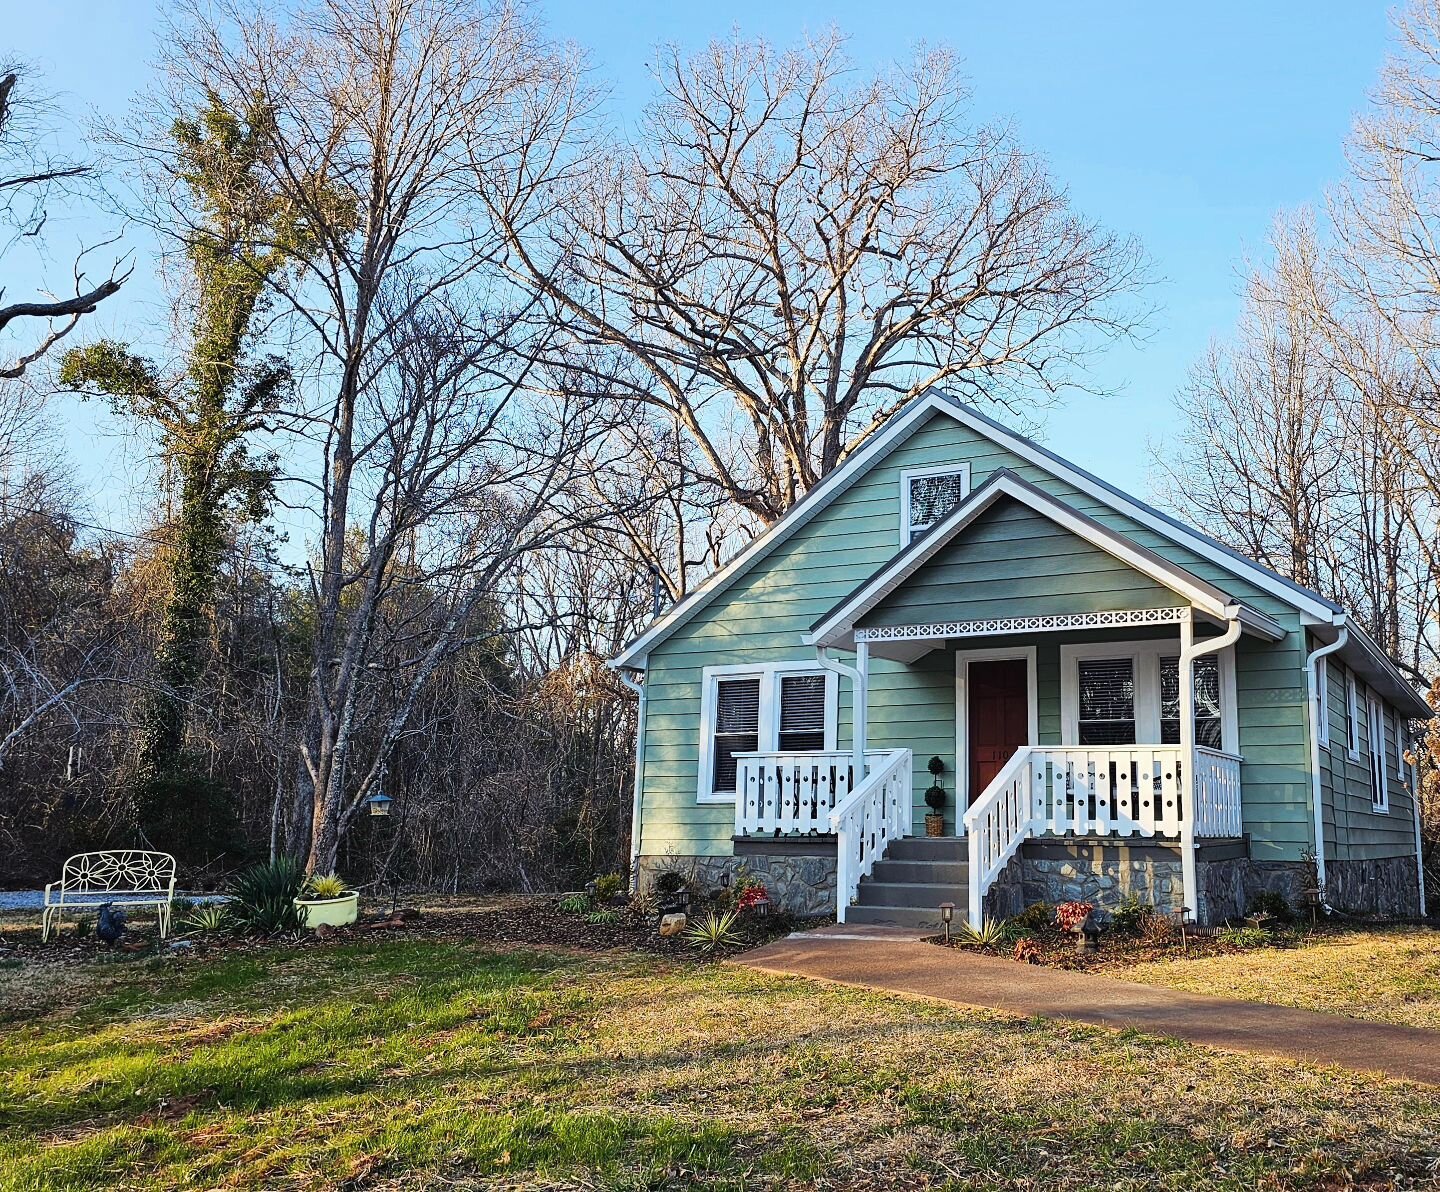 Storybook cottage for your picture-perfect life 💚
.
.
NEW LISTING ▪︎ 110 Jessie Drive ▪︎ near downtown Morganton NC ▪︎ 4 bedroom, 2.5 baths. ▪︎. Link in bio 👆
.
.
.
#smalltownlife
#homesweethome
#downtownmorganton 
#burkecountync
#wncrealestate
#li